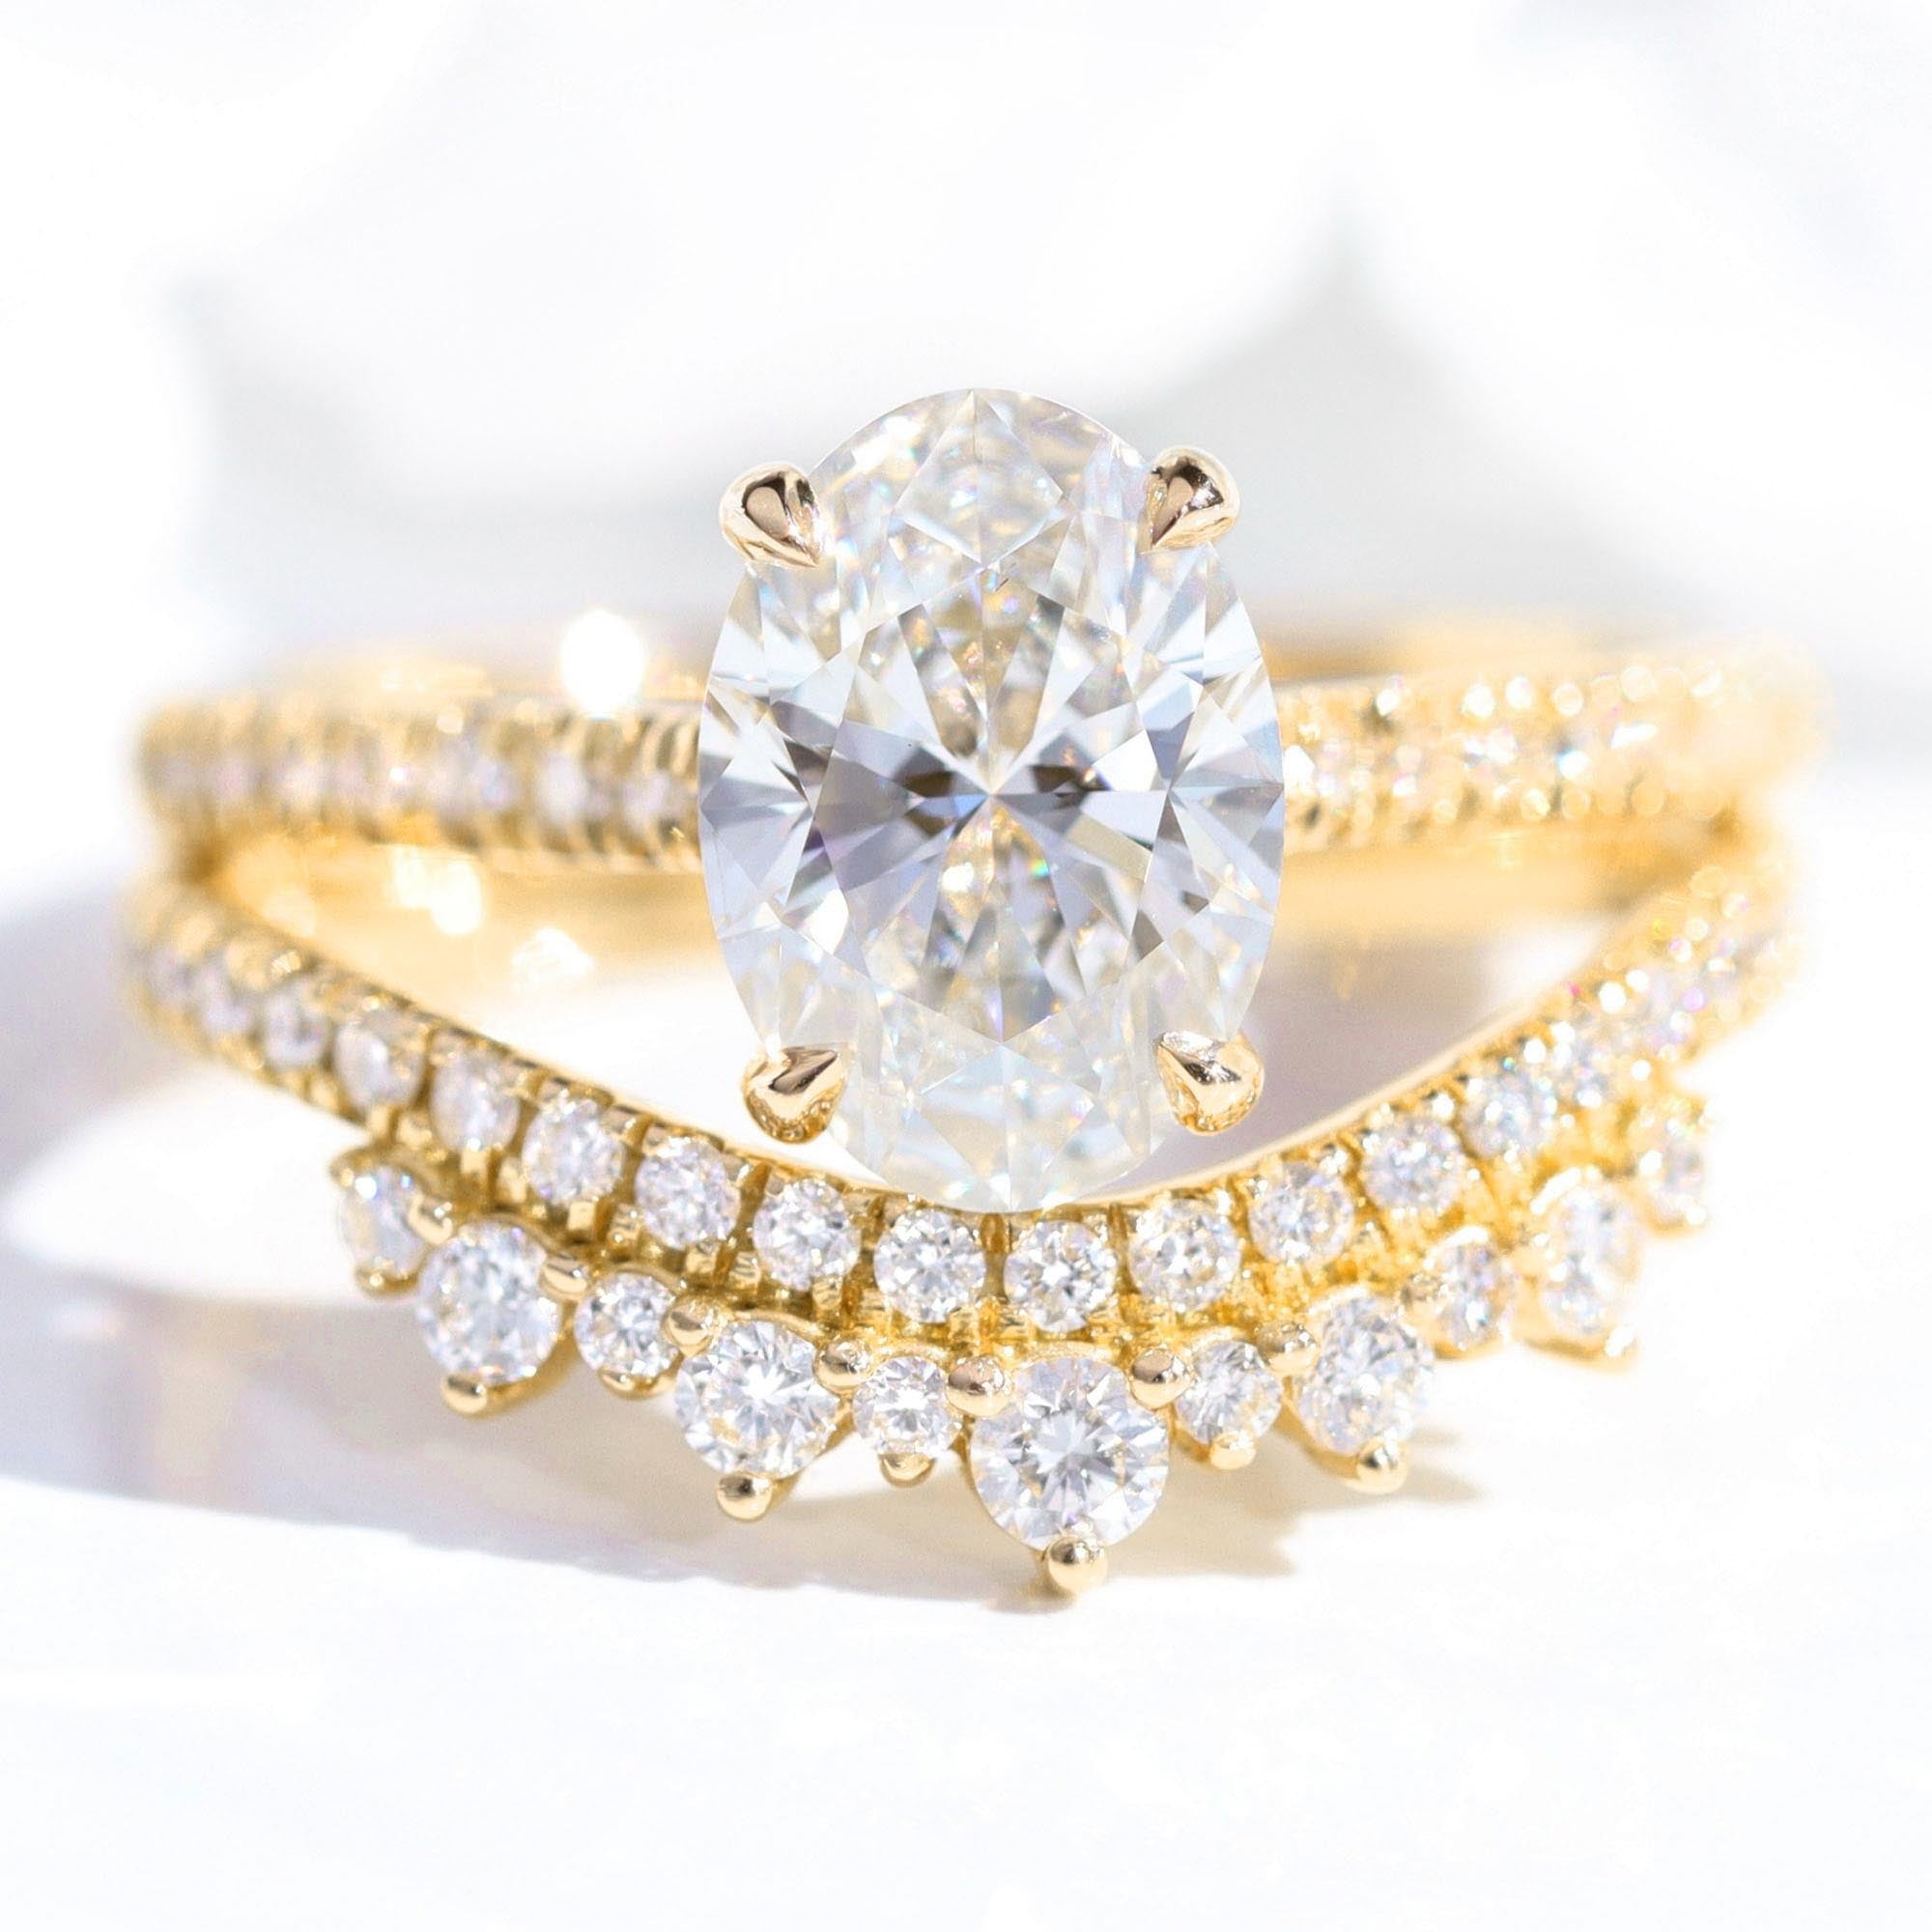 lab diamond ring stack yellow gold oval diamond solitaire engagement ring set La More Design Jewelry